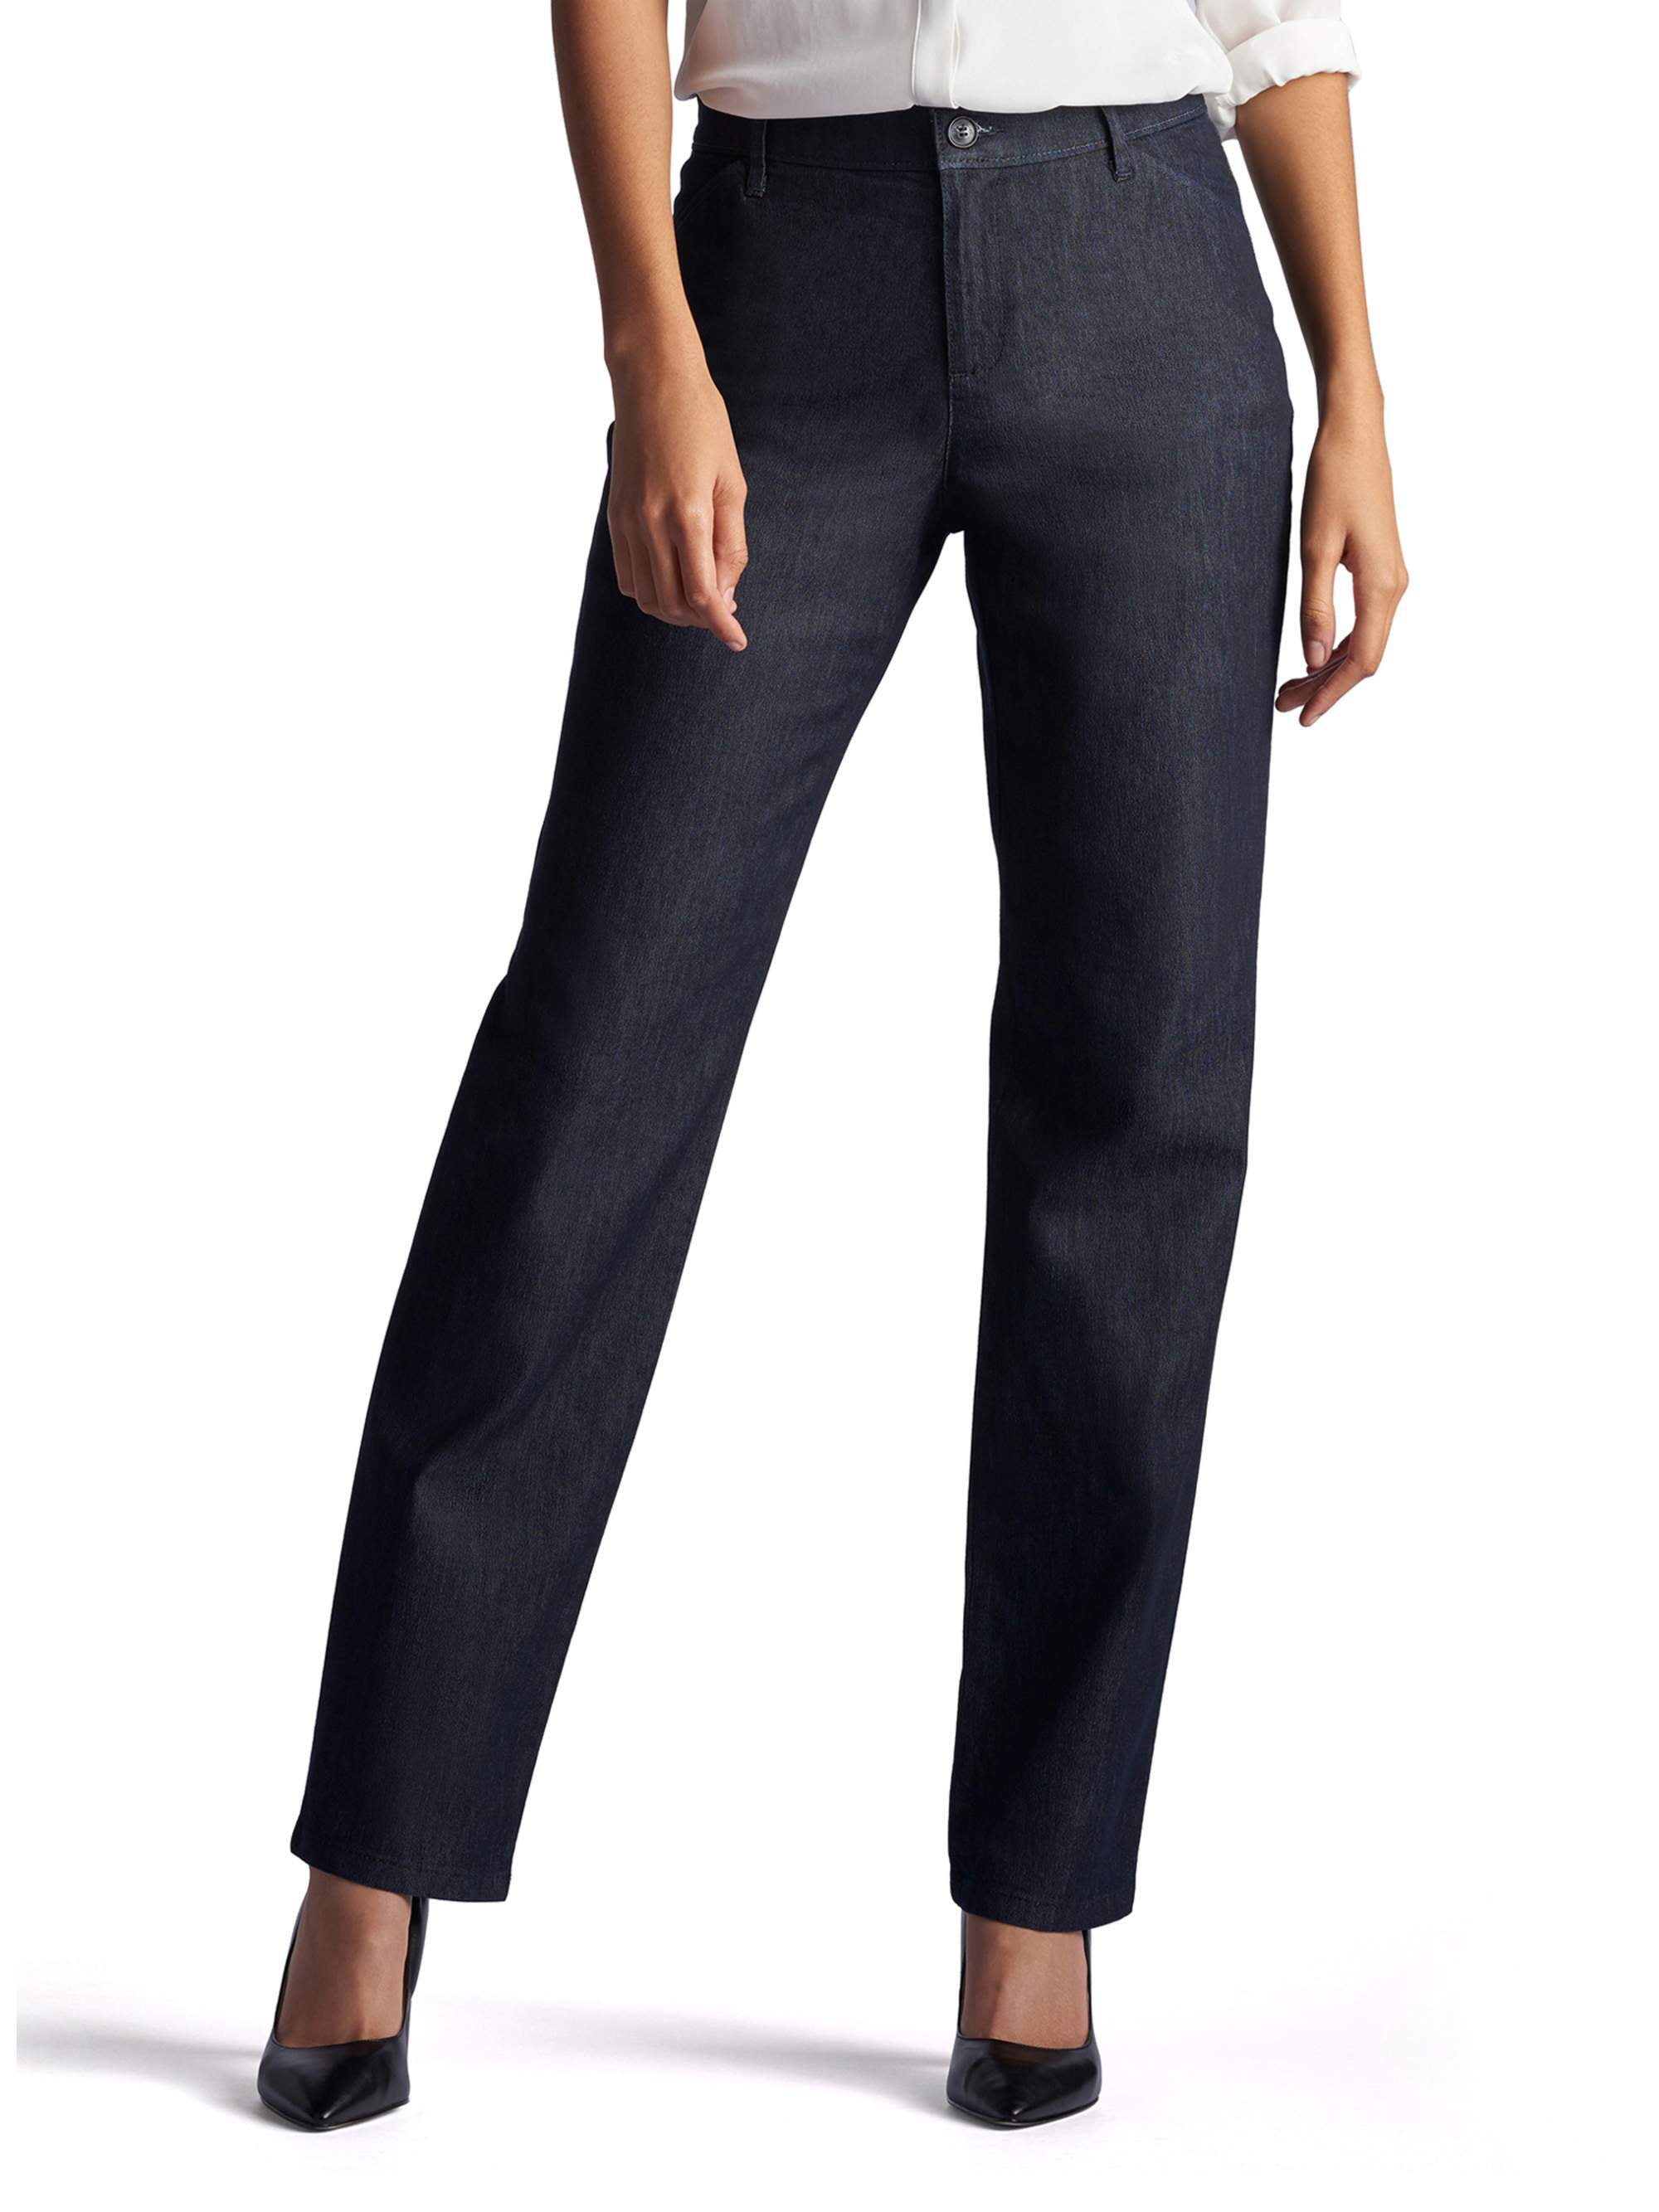 Lee Jeans Women's Relaxed Fit Straight Leg Pant 